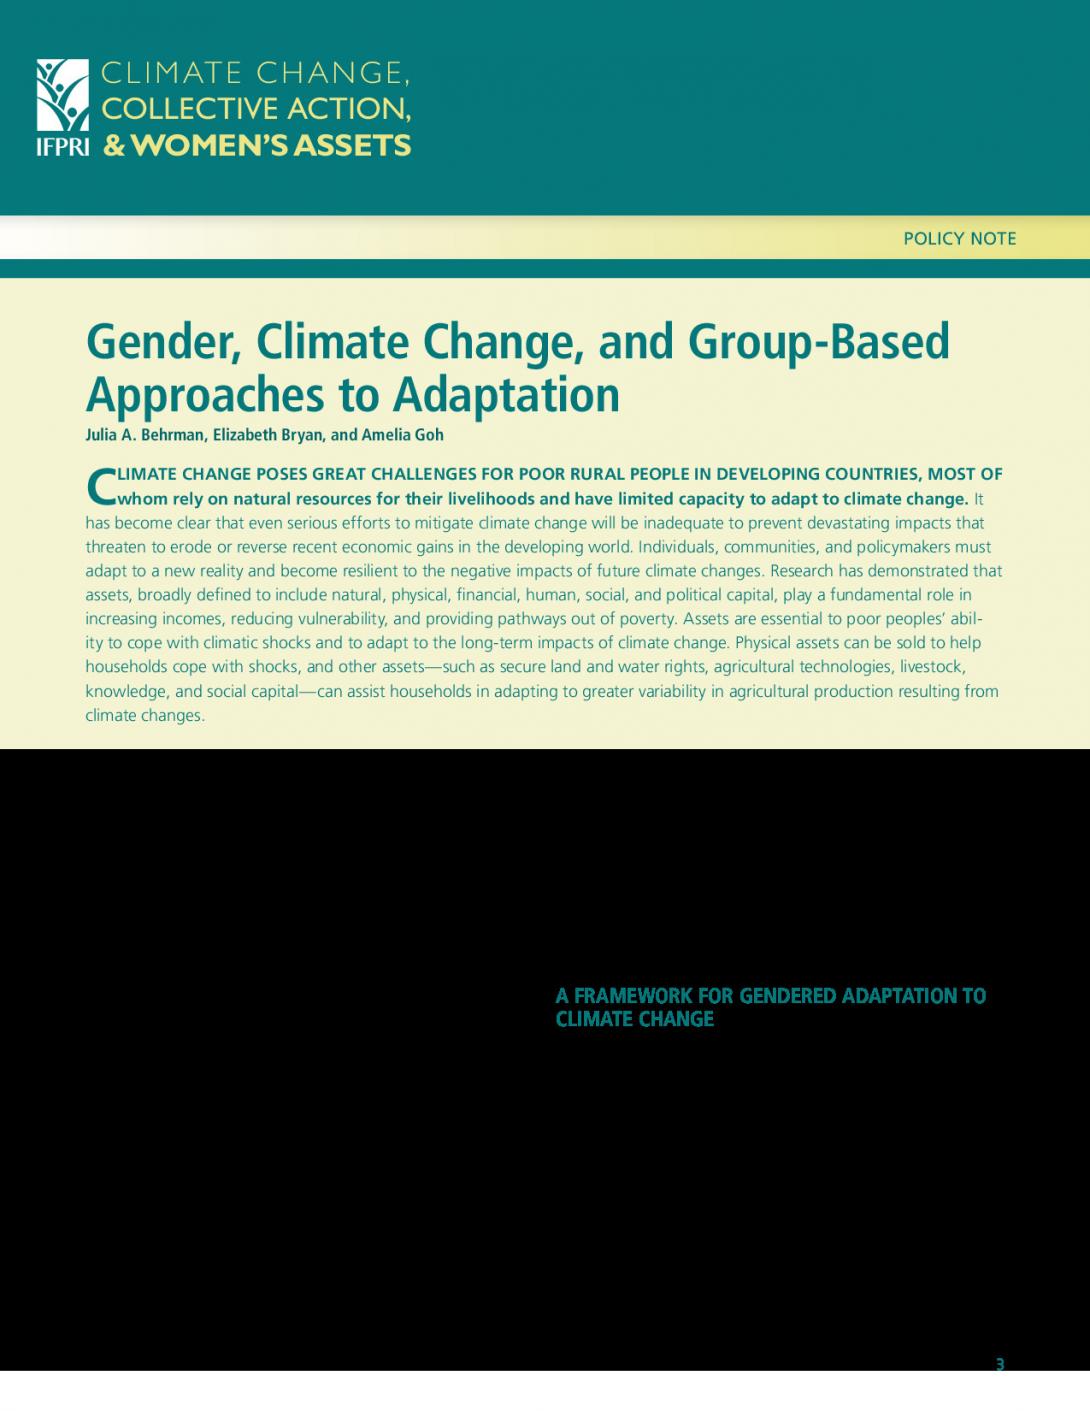 Gender, Climate Change, and Group-Based Approaches to Adaptation